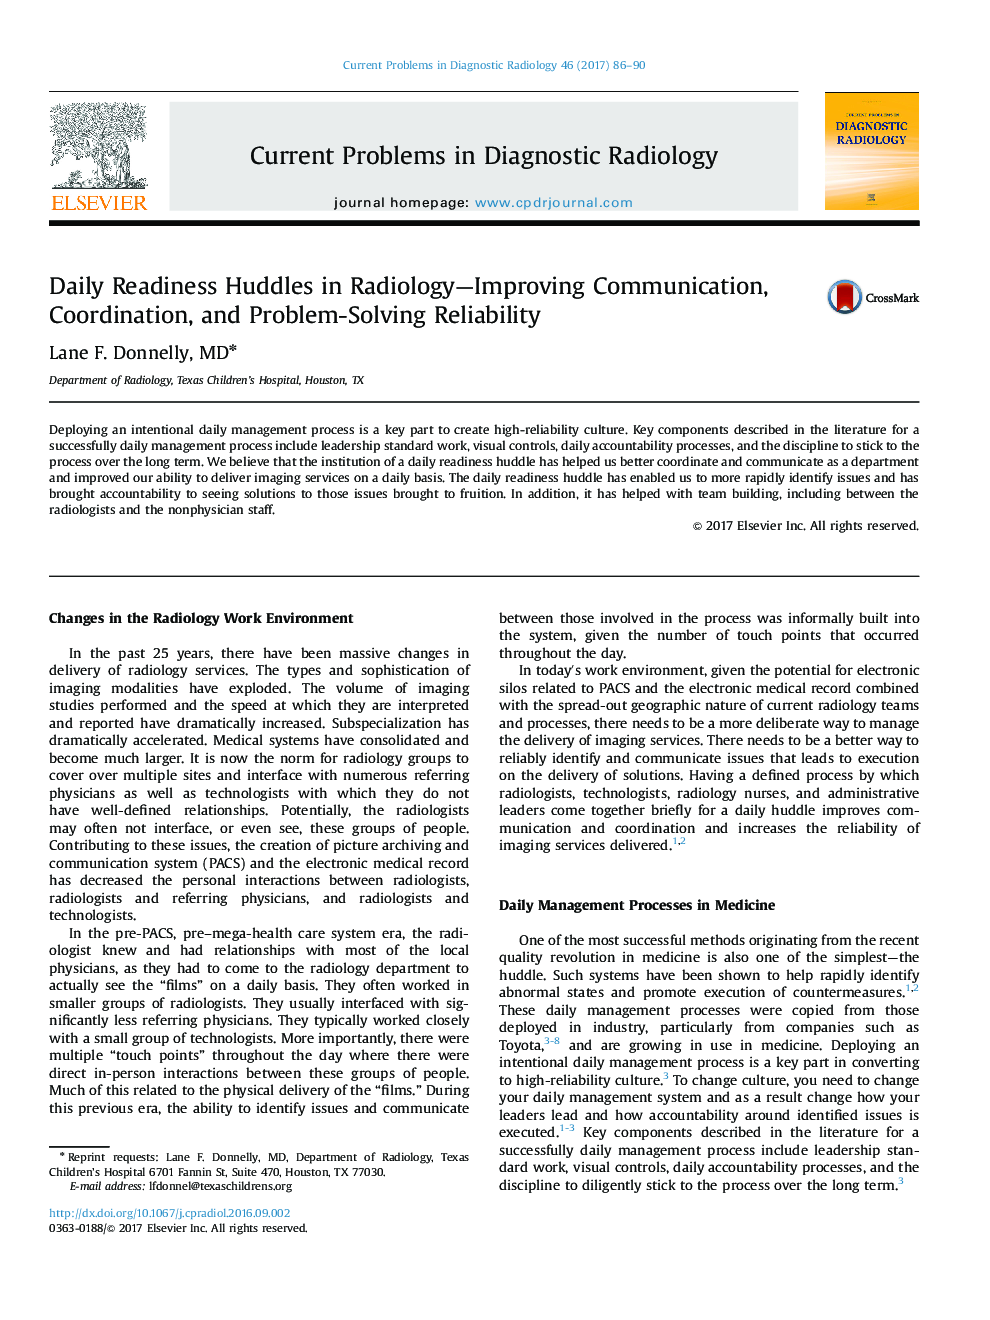 Daily Readiness Huddles in Radiology-Improving Communication, Coordination, and Problem-Solving Reliability